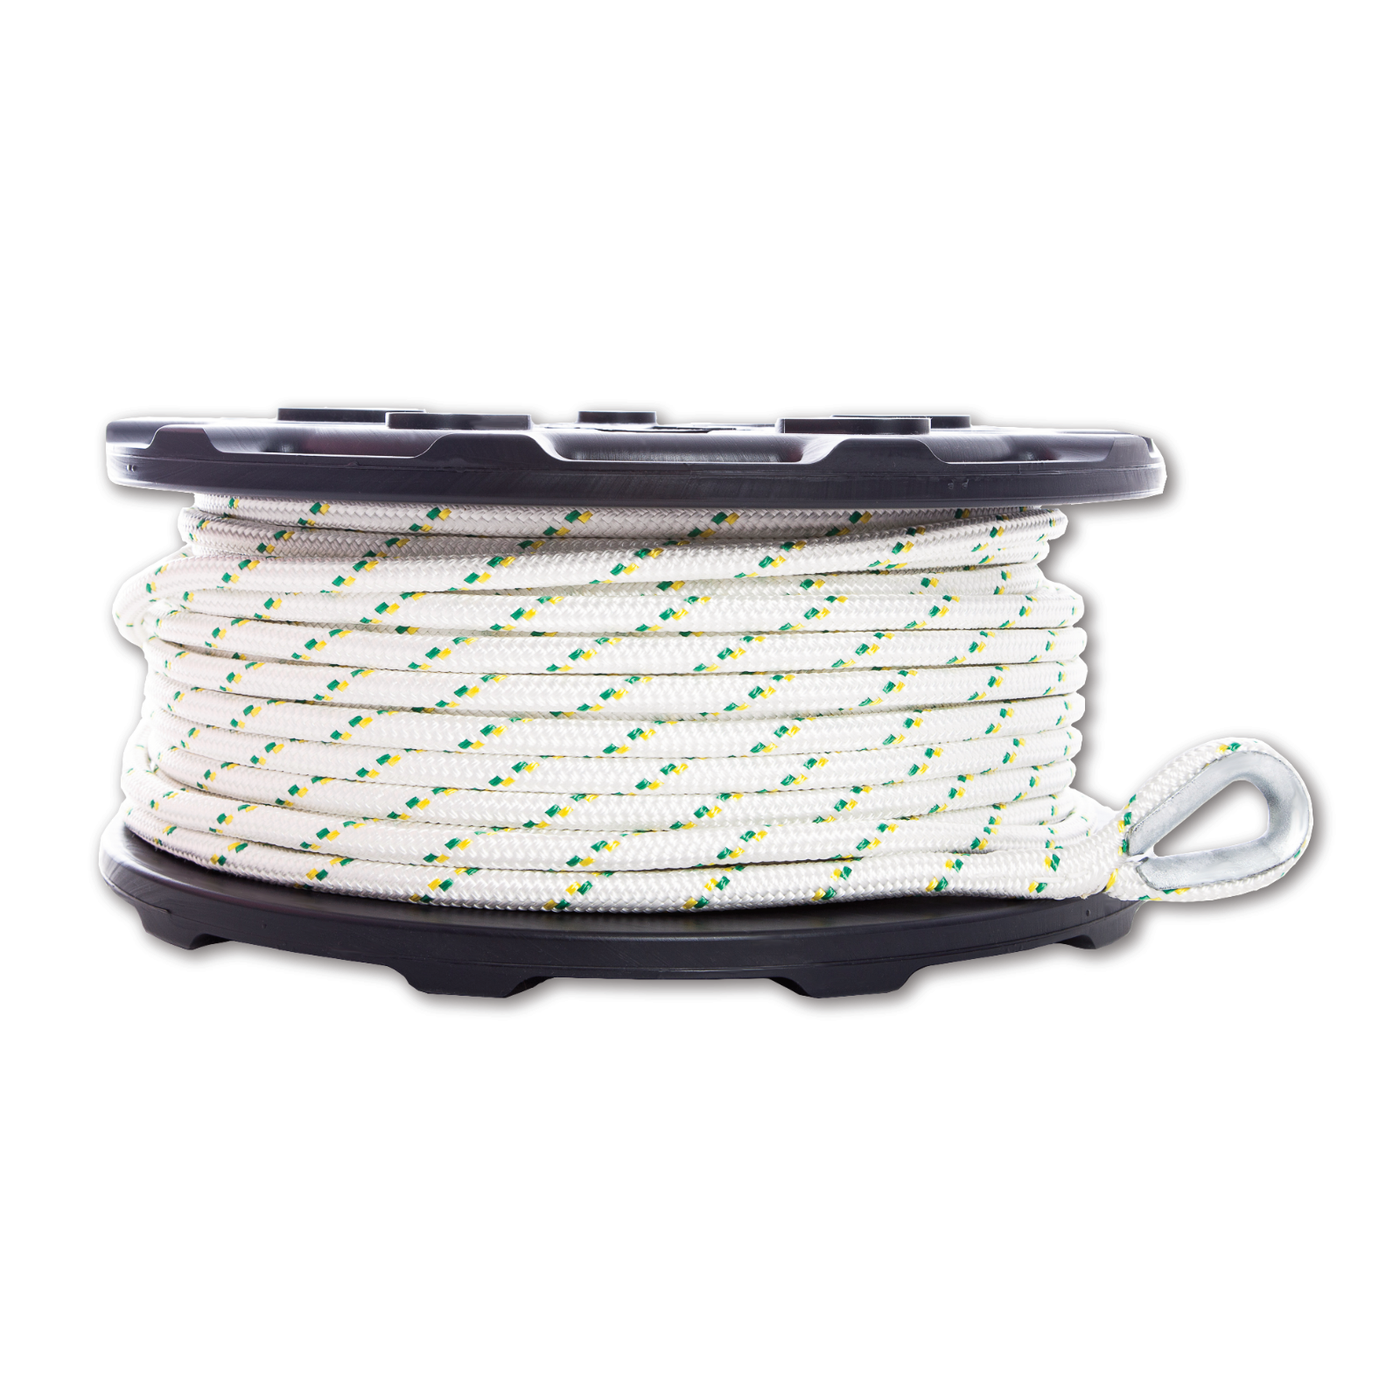 1/2'' X 328 ft long double braided rope splice